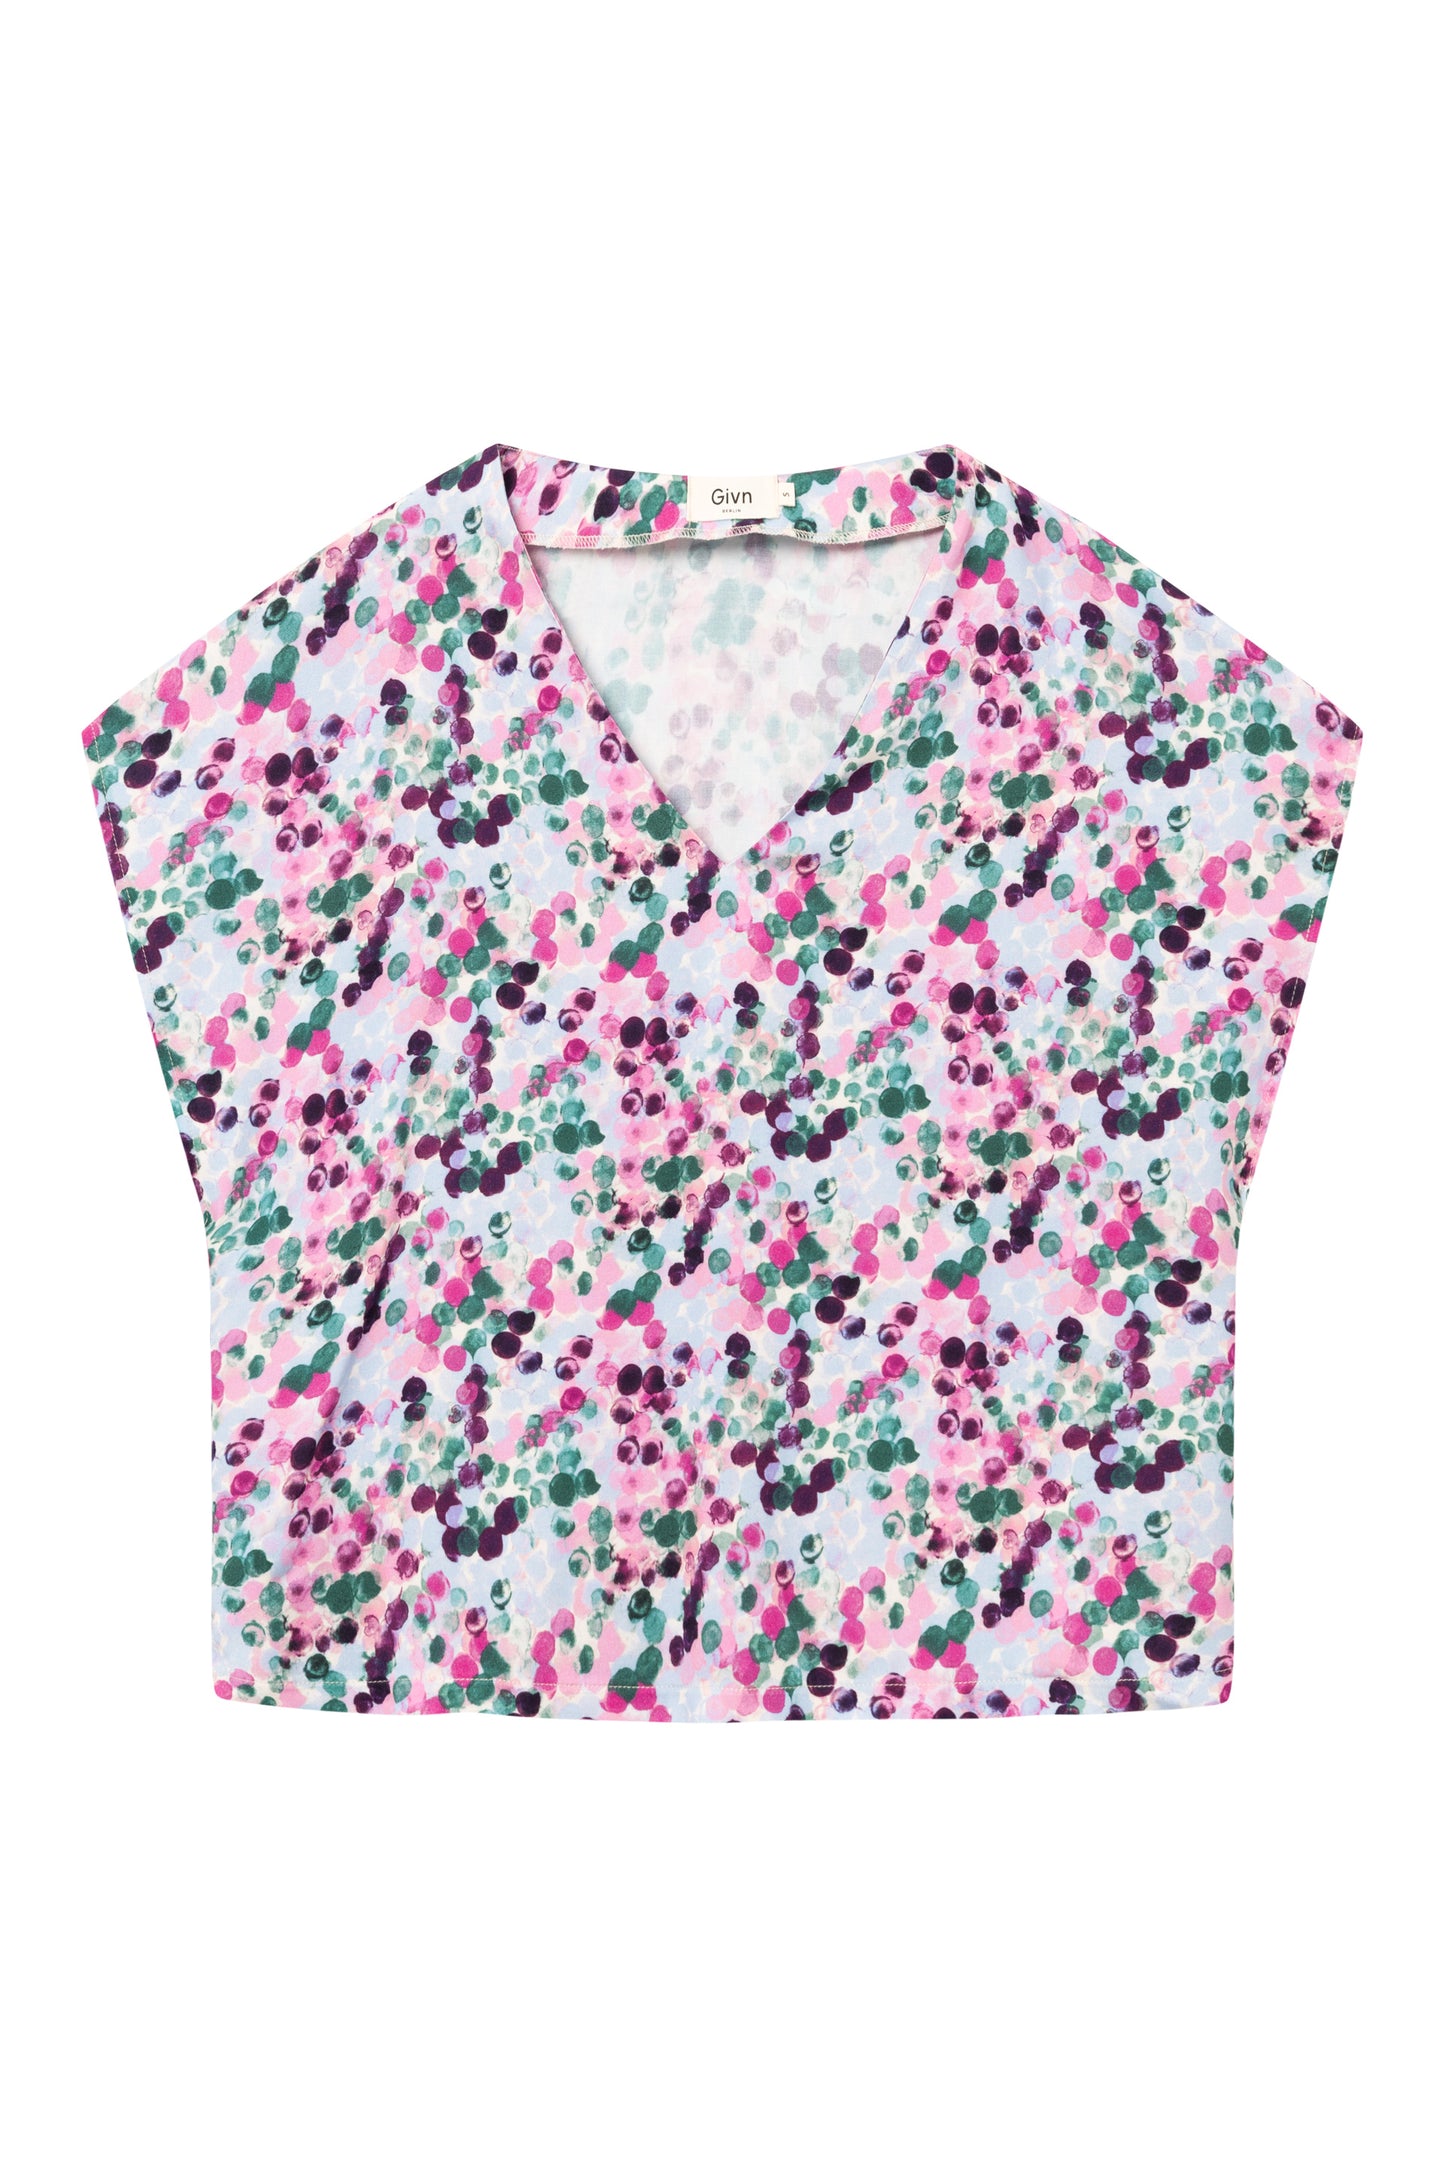 Givn - Ruby Blouse Green / Violet (Bubbles)